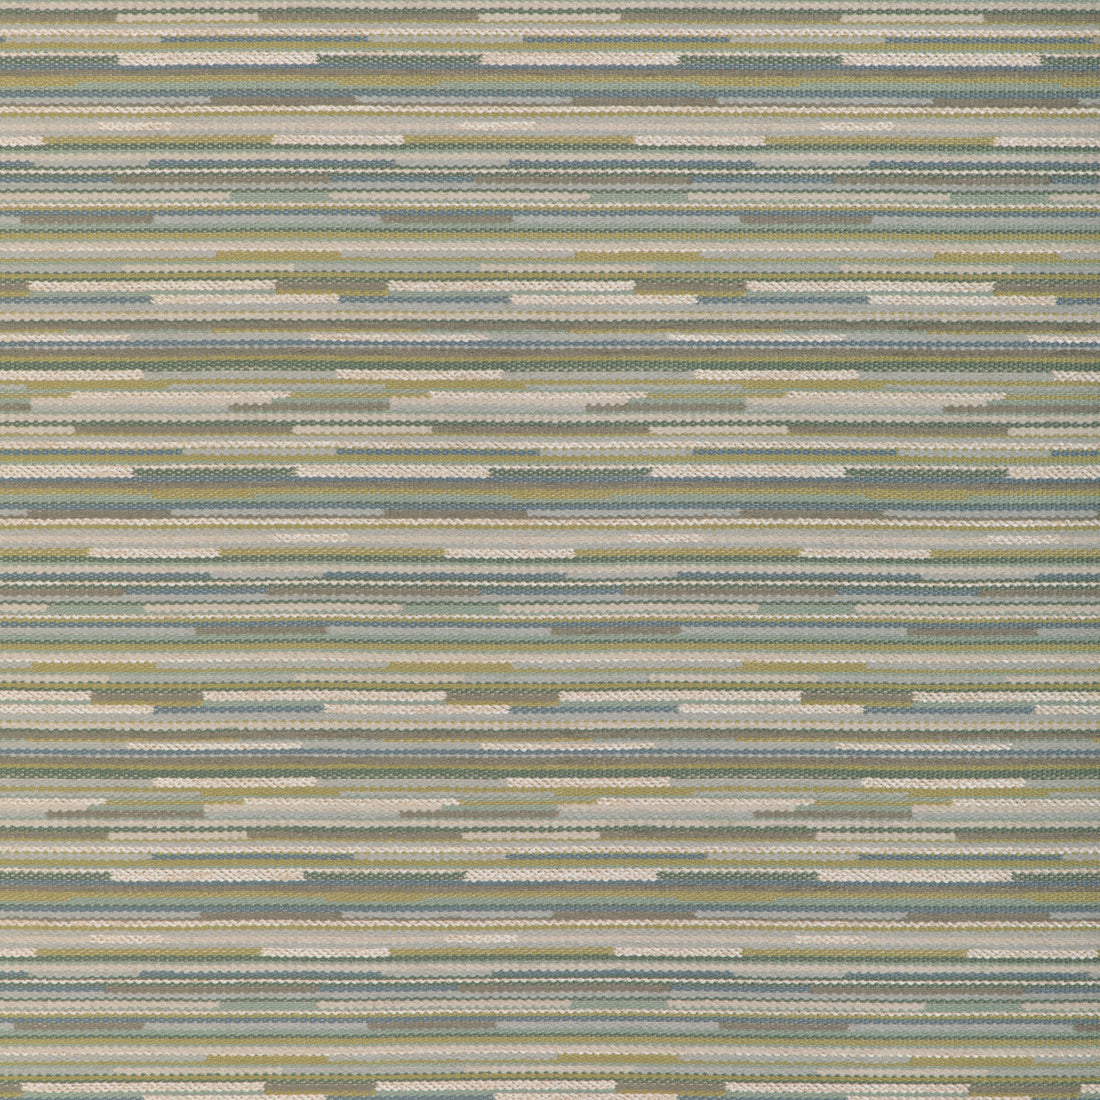 Watershed fabric in seaglass color - pattern 37070.315.0 - by Kravet Contract in the Chesapeake collection